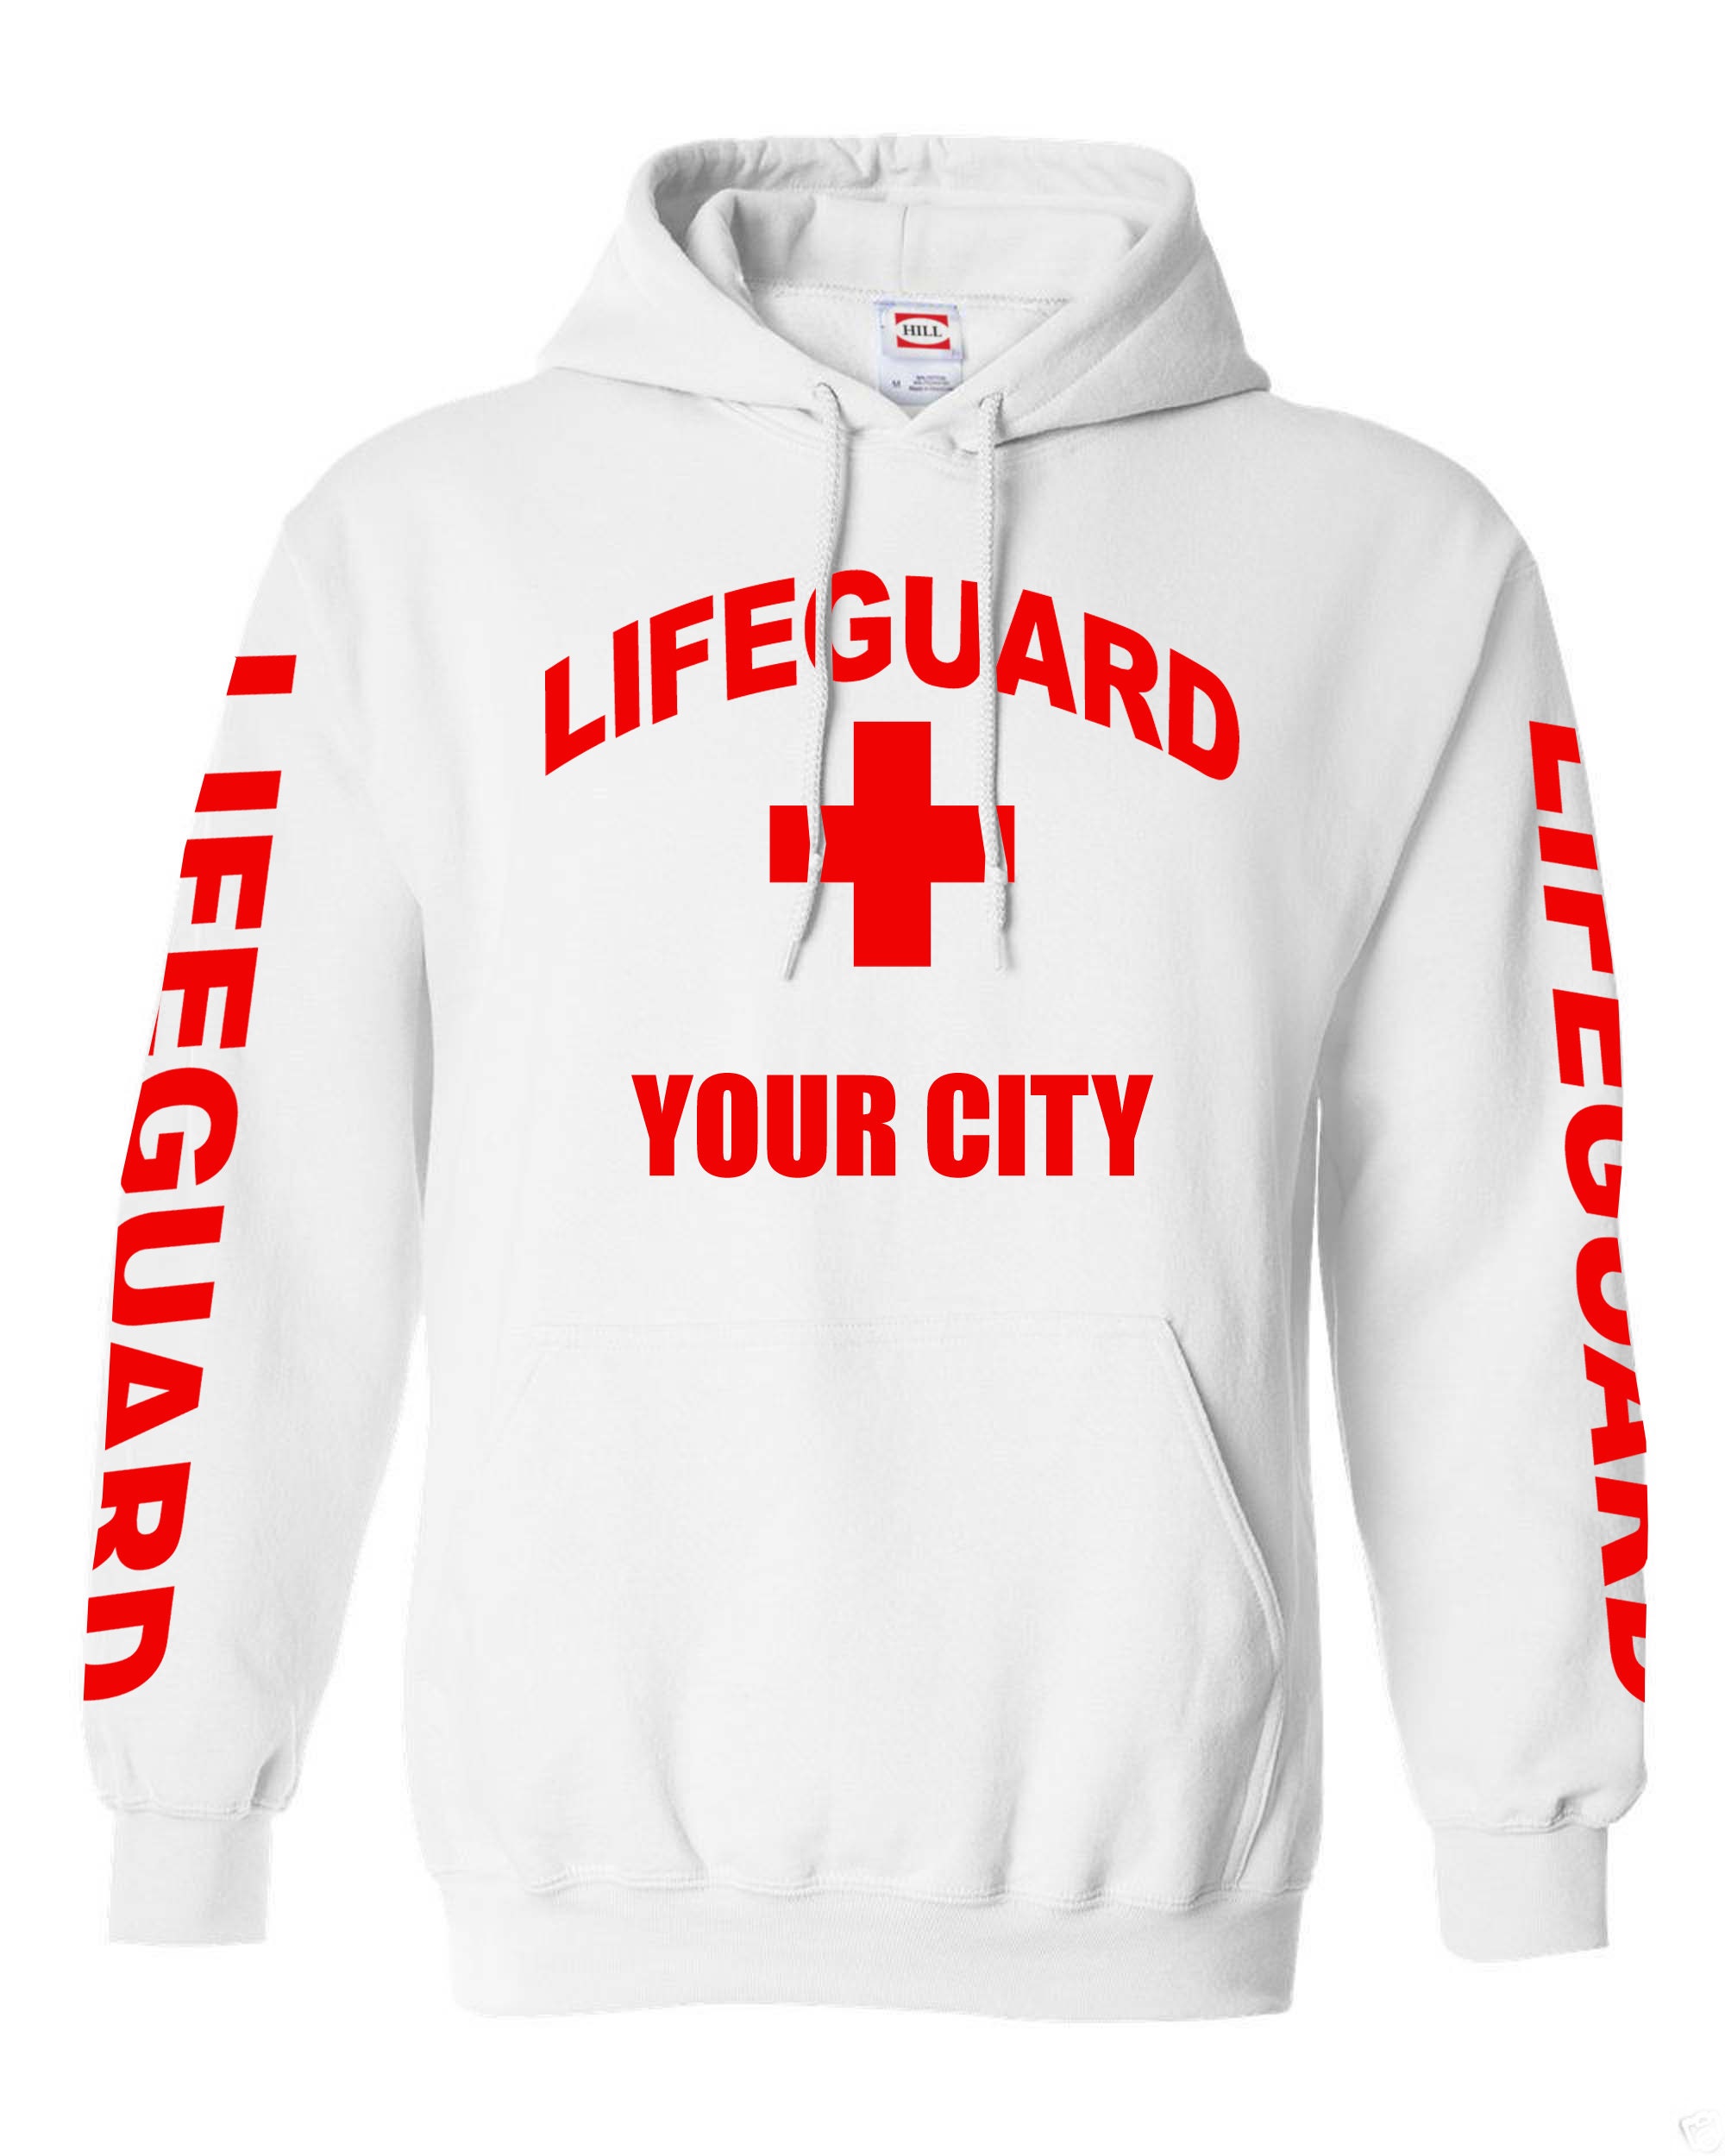 Personalized Life Guard Hoodies choose Your Own CITY or | Etsy